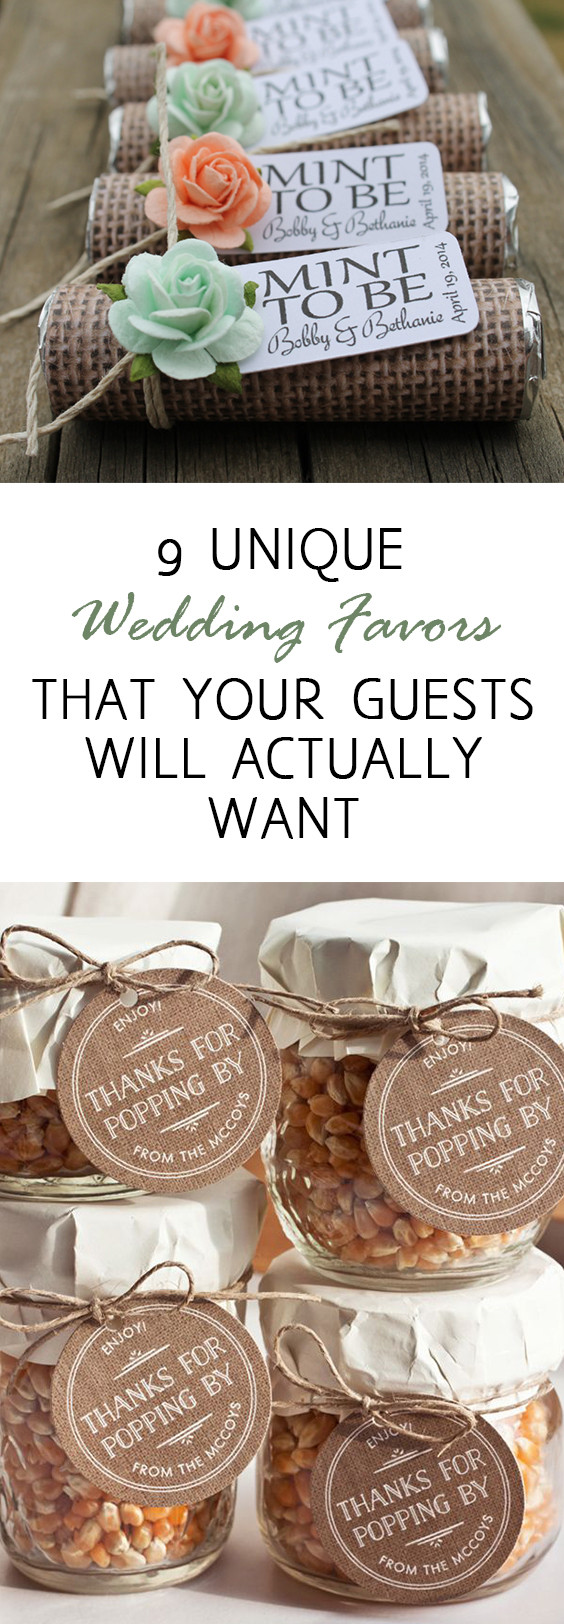 Cheap Wedding Favor
 9 Unique Wedding Favors that Your Guests Will Actually